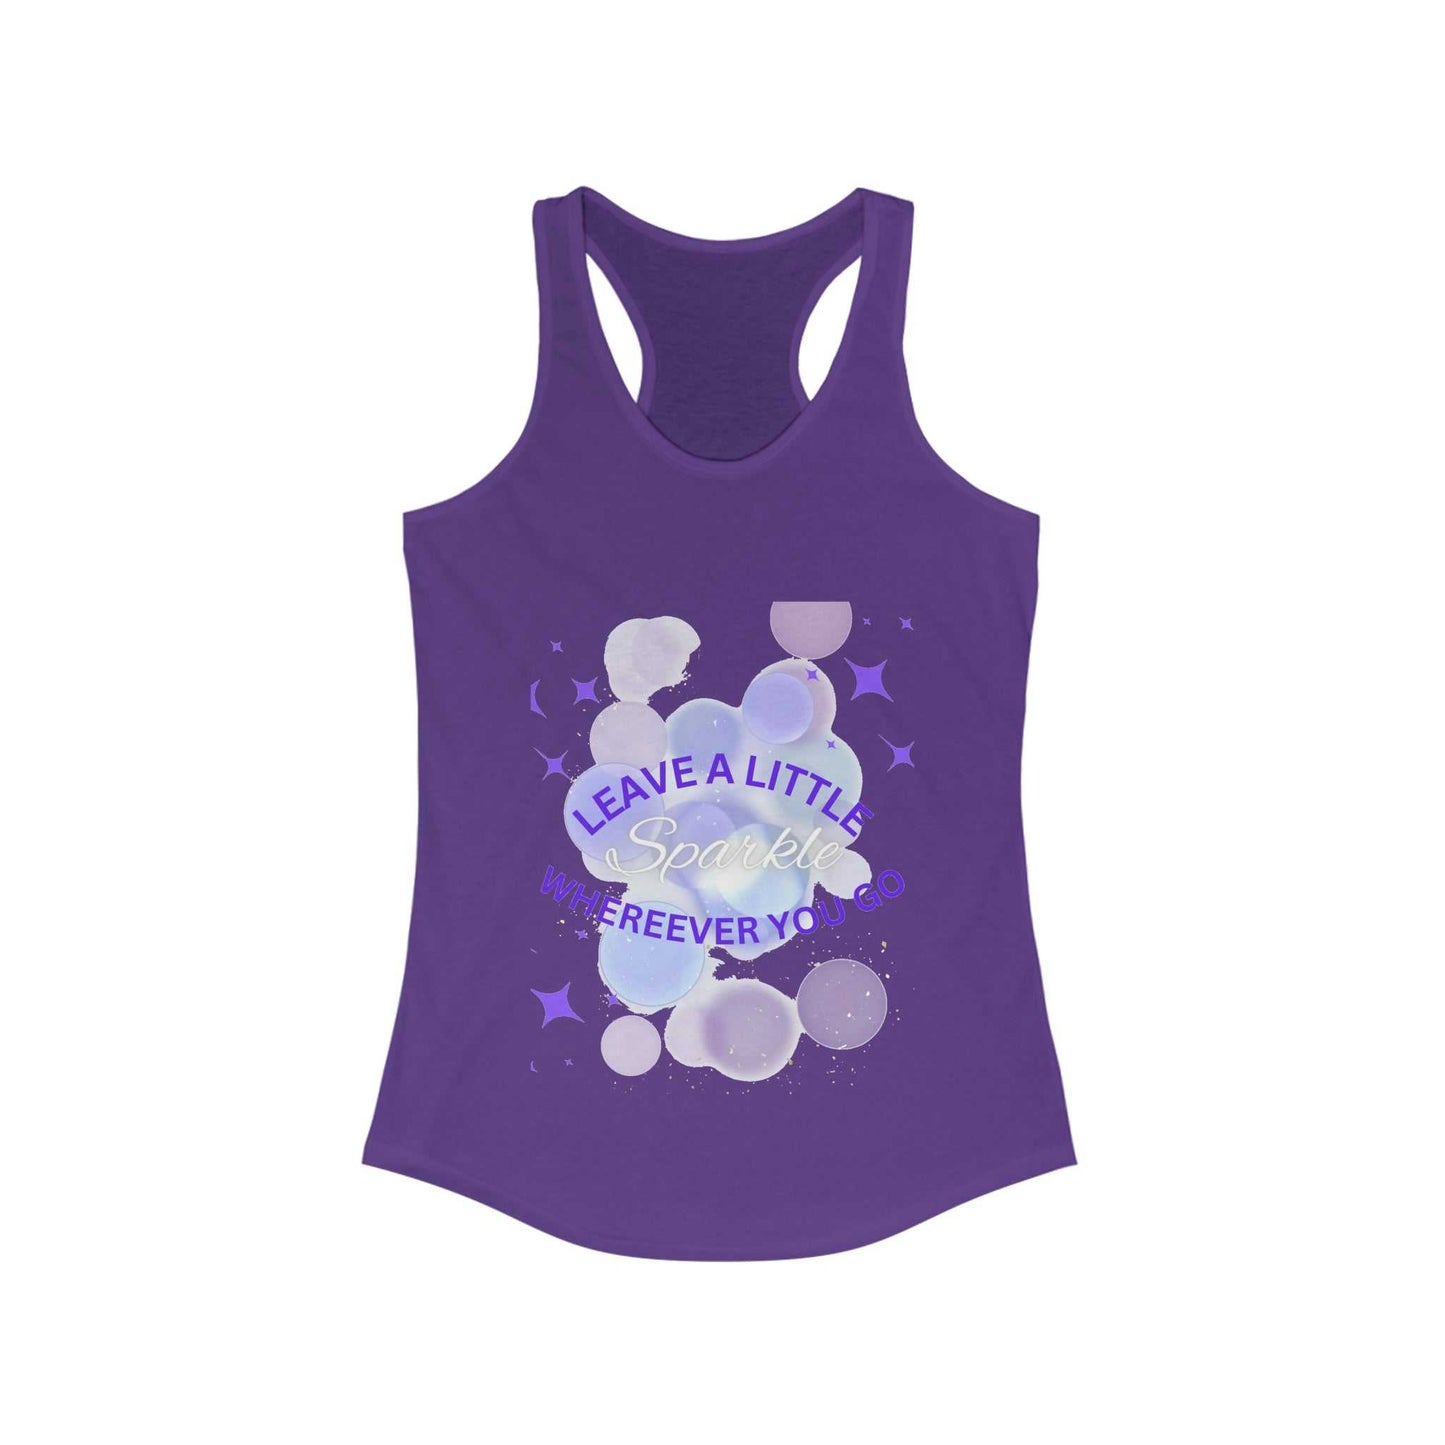 Leave a Little Sparkle Women's Ideal Racerback Tank T-shirts and Tanks Tank Top Good Vibes Daily Lab 23